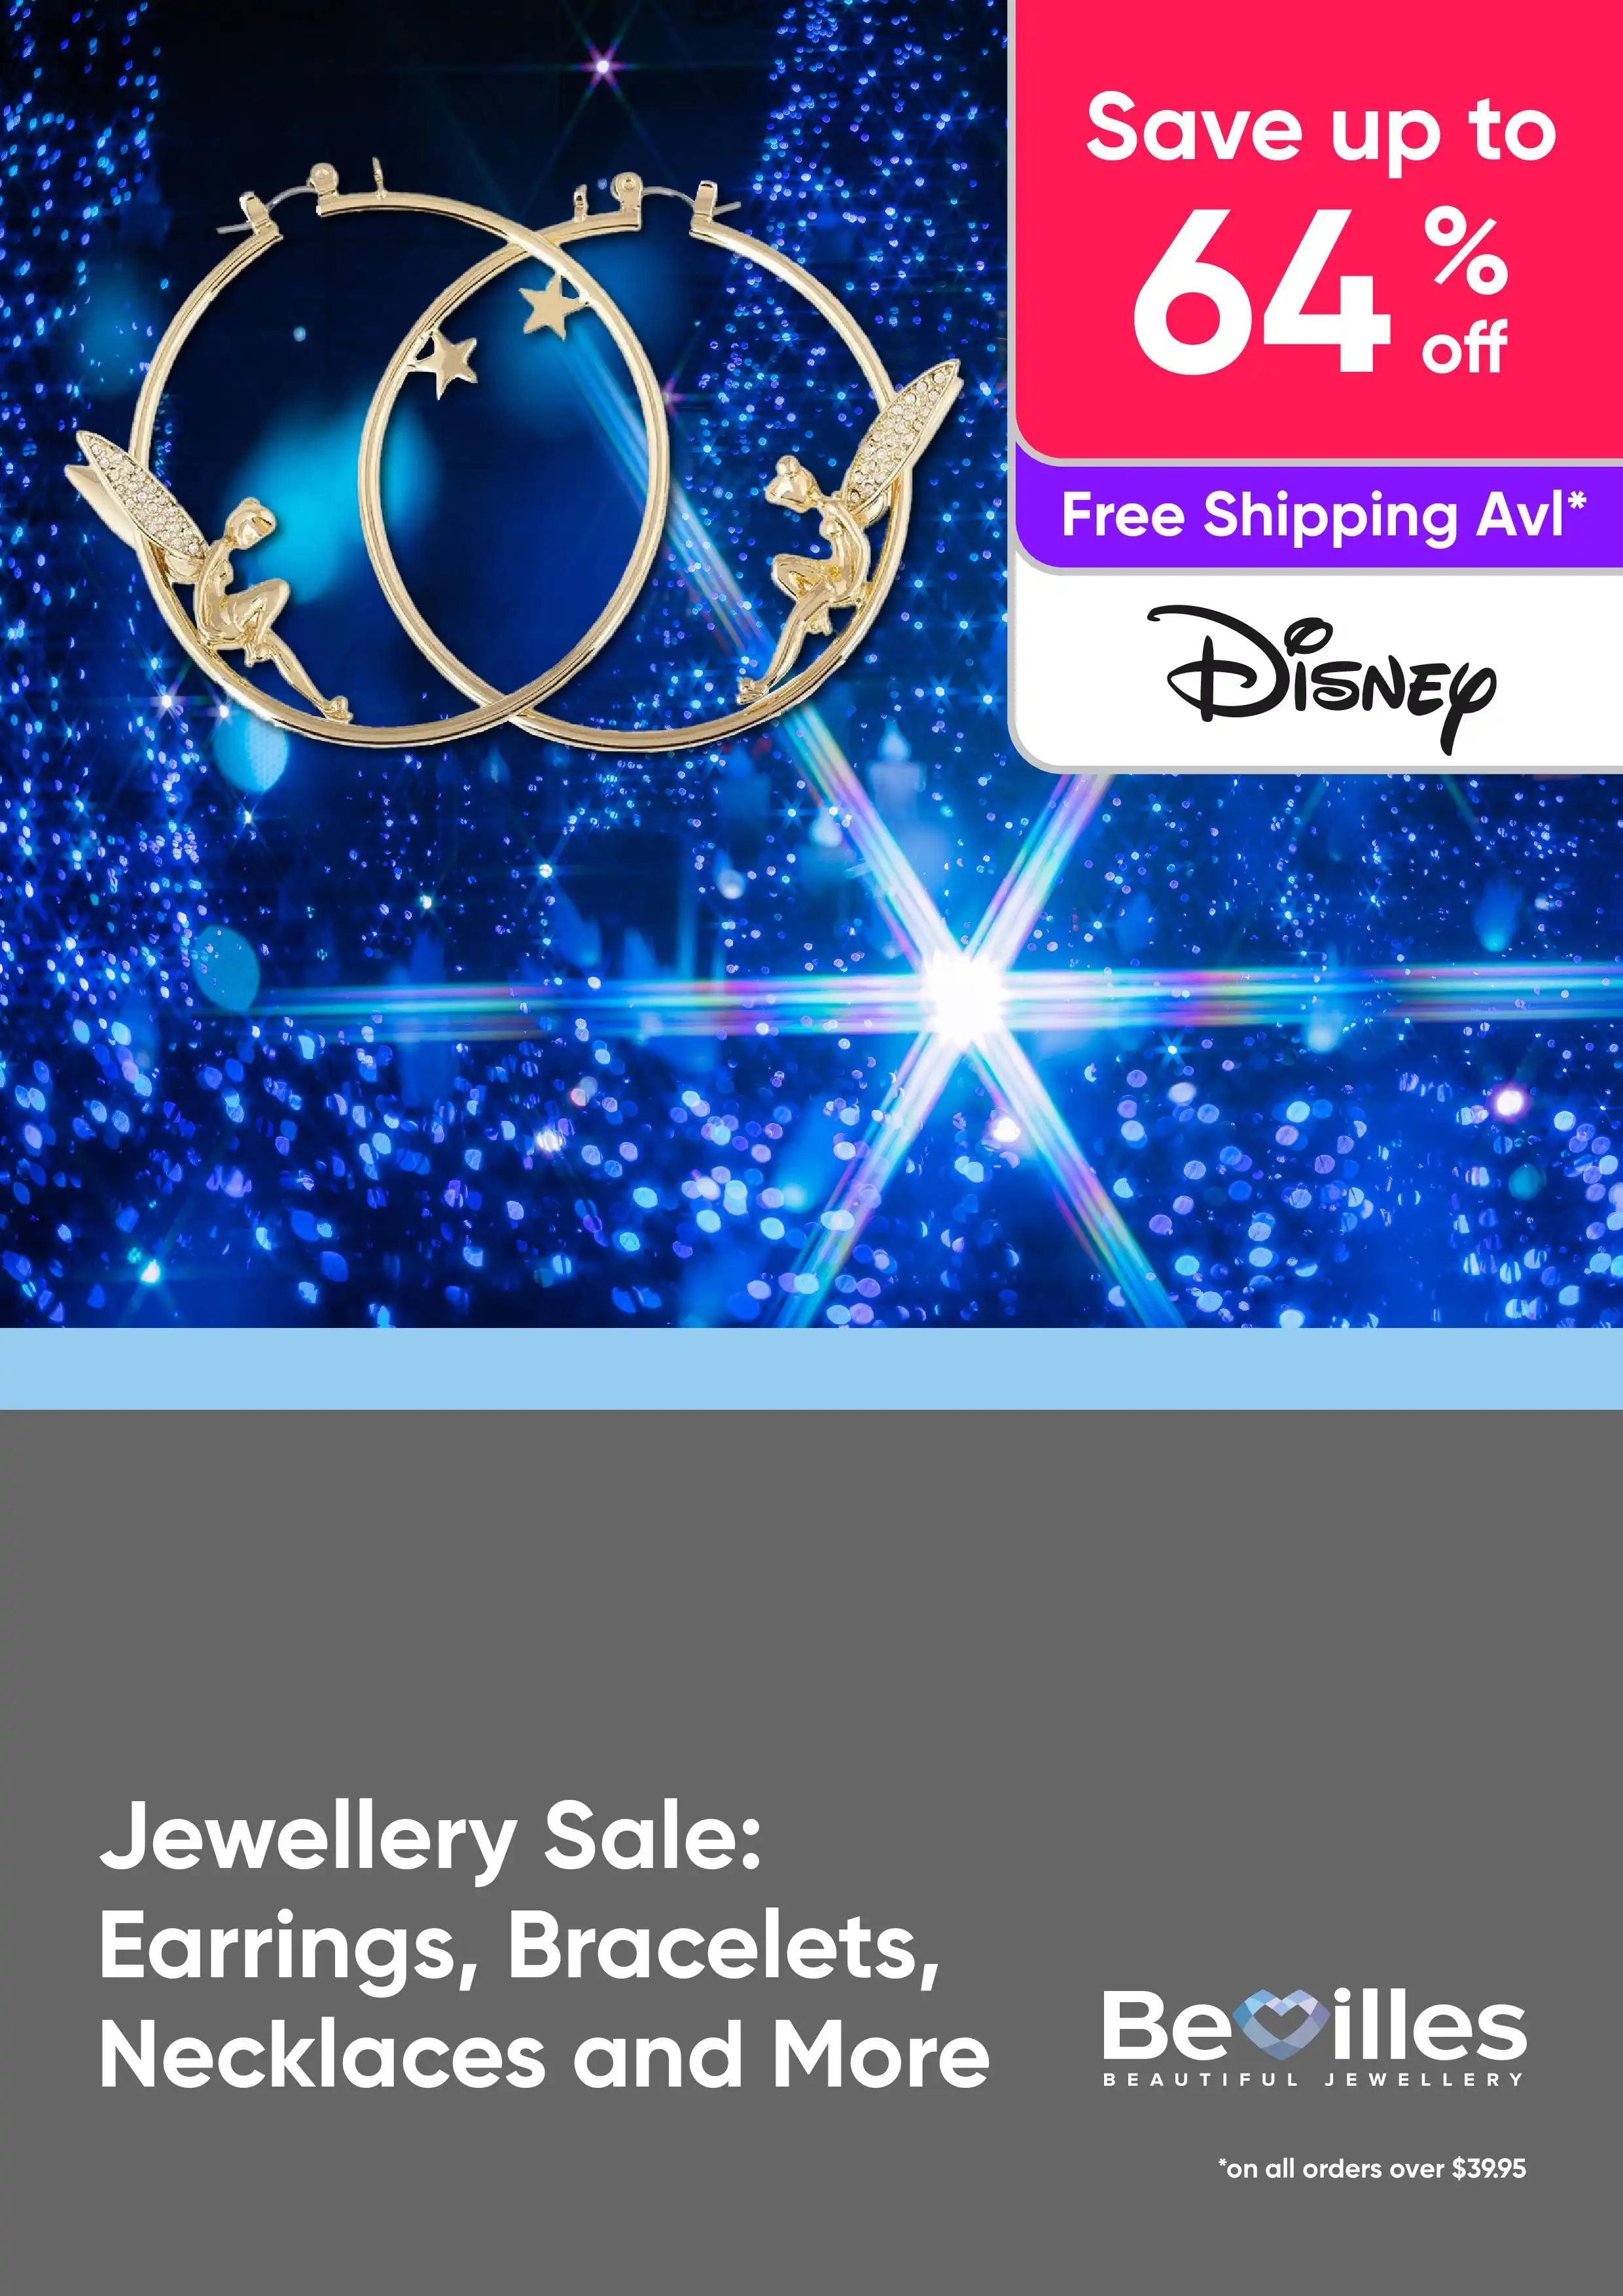 Disney Jewellery Sale - Earrings, Bracelets, Necklaces and More - up to 64% off